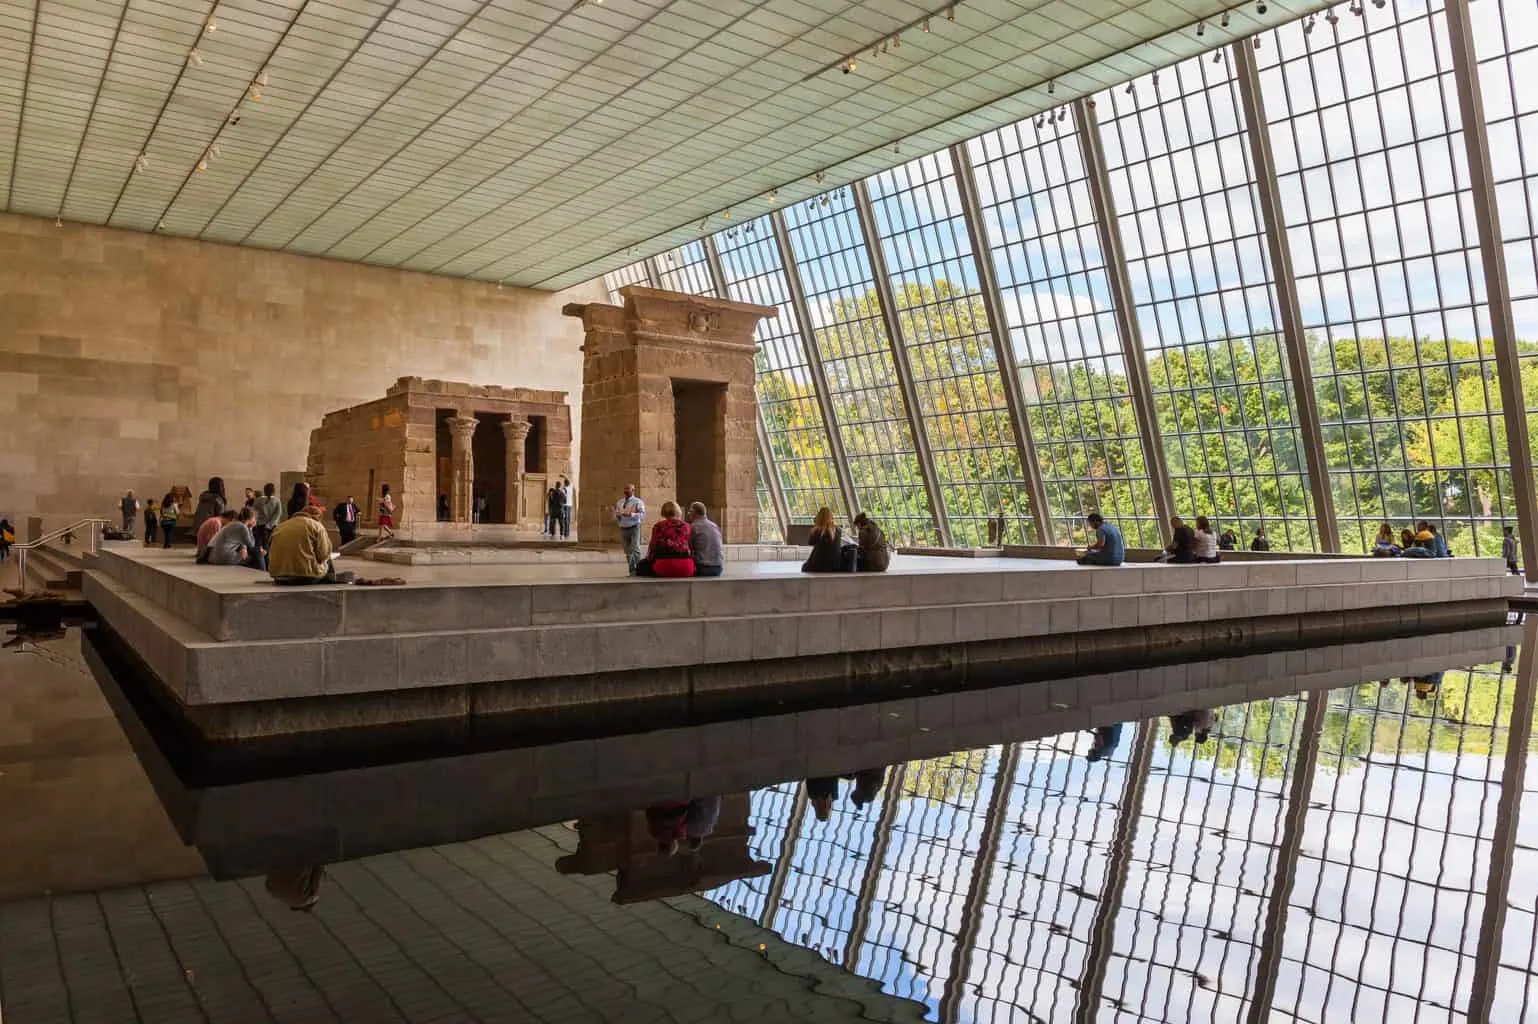 Visit iconic places like the Temple of Dendur in the Metropolitan Museum of Art in NYC. 